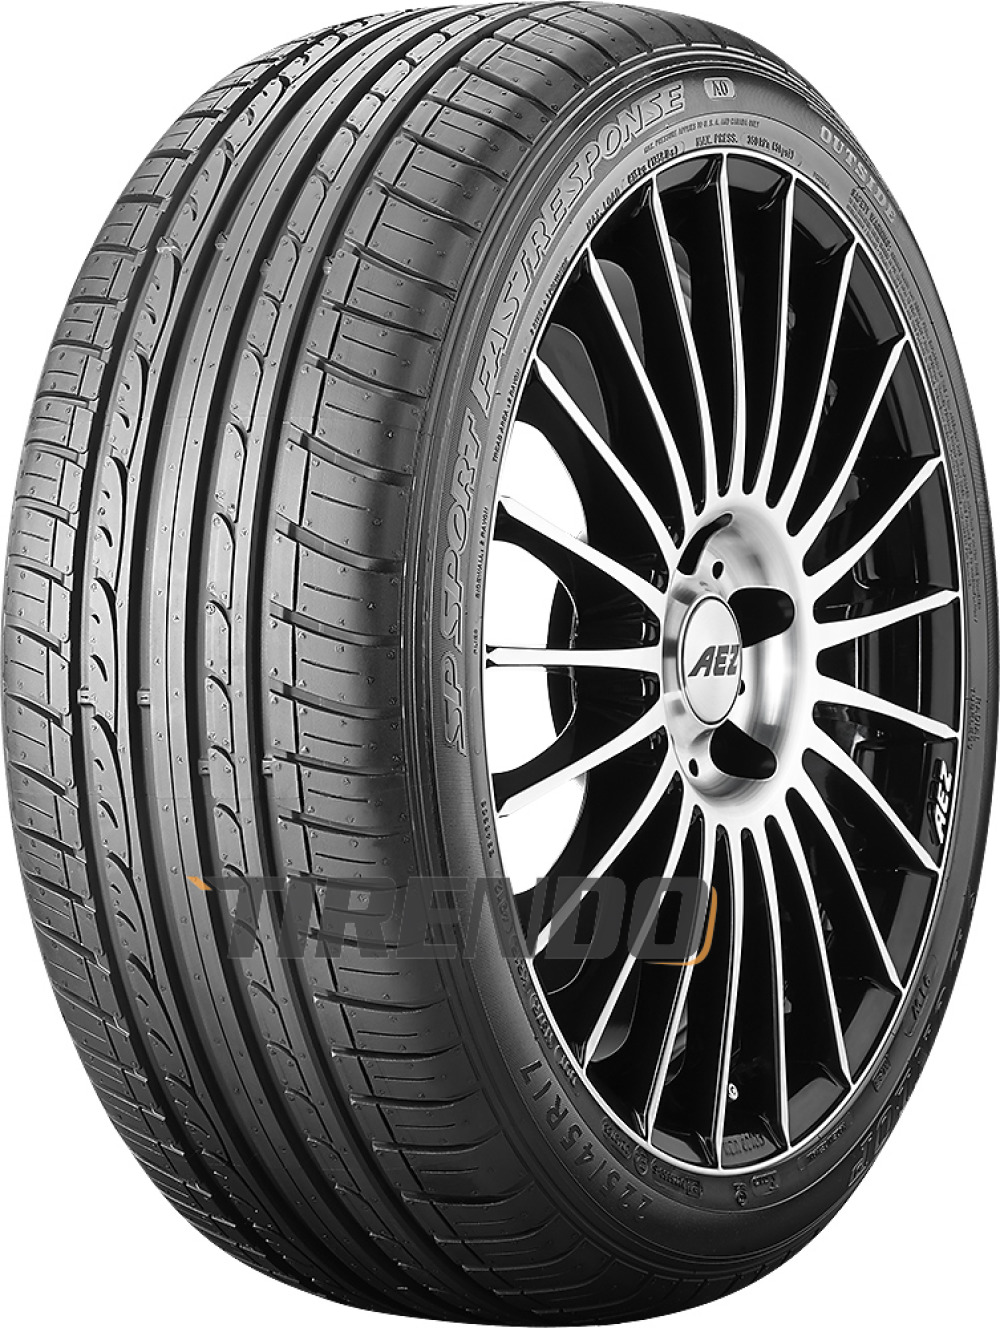 Image of Dunlop SP Sport FastResponse ( 225/45 R17 94Y XL AO )